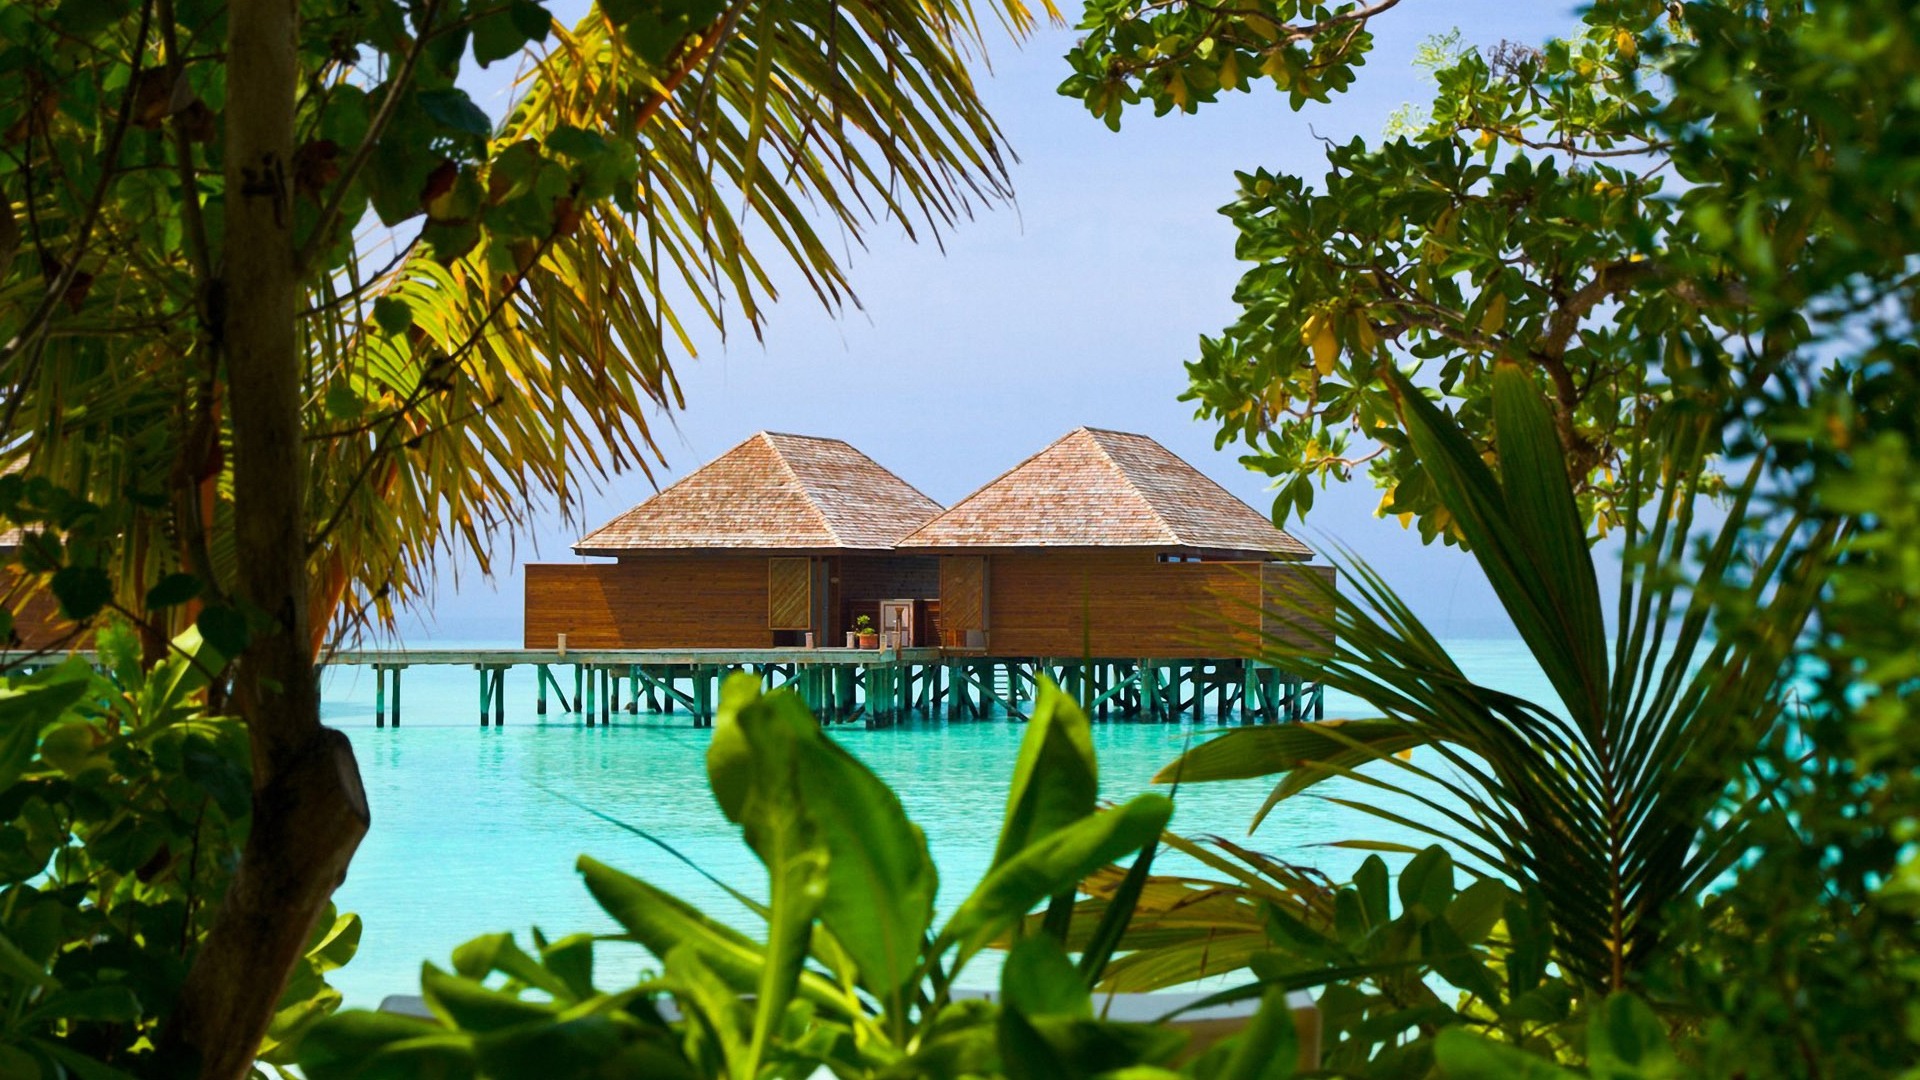 Water Bungalows Wallpaper Other Nature Wallpapers In Format For